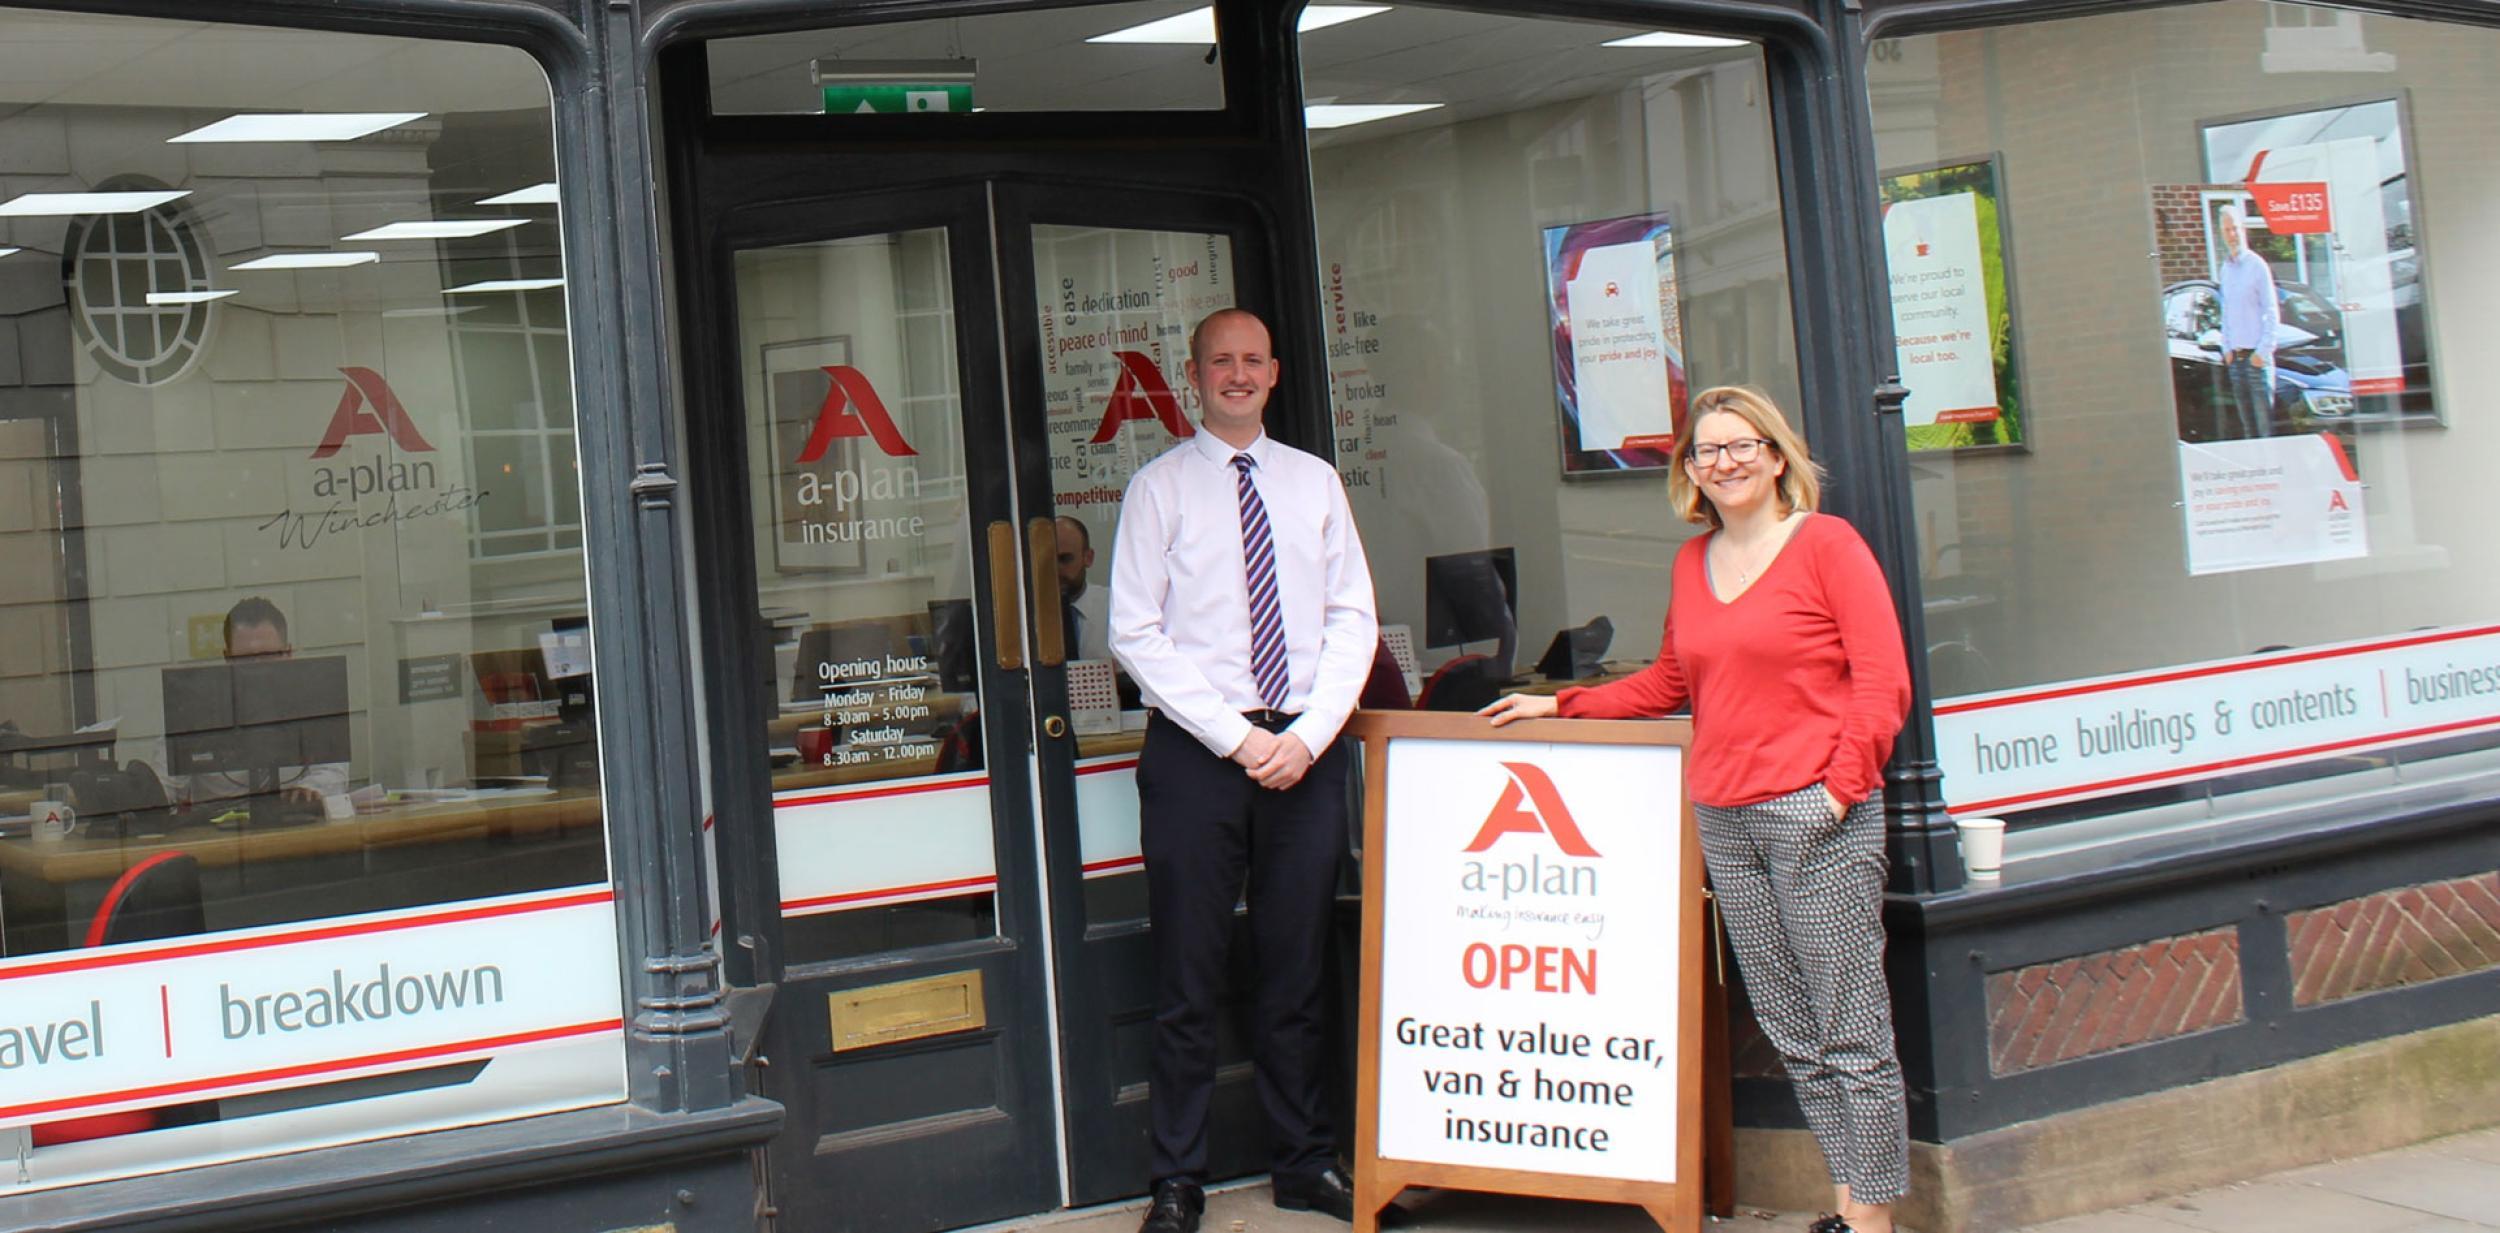 A-Plan's Ian Tuffrey standing outside the branch with Play to the Crowd's Kirstie Mathieson